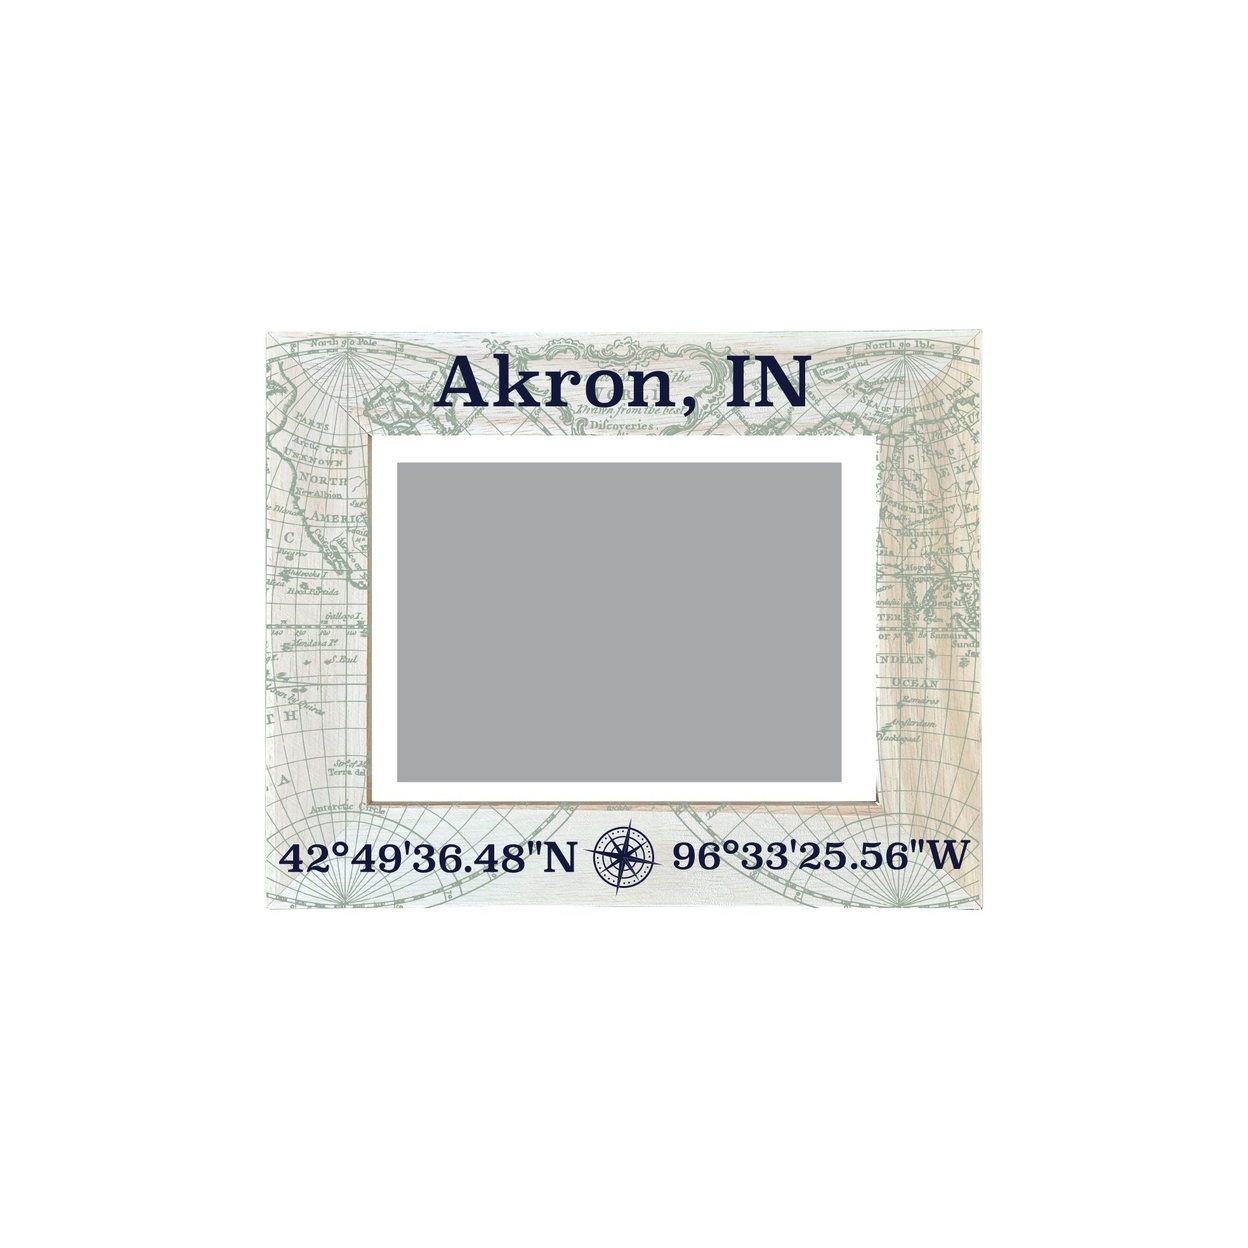 Akron Indiana Souvenir Wooden Photo Frame Compass Coordinates Design Matted To 4 X 6